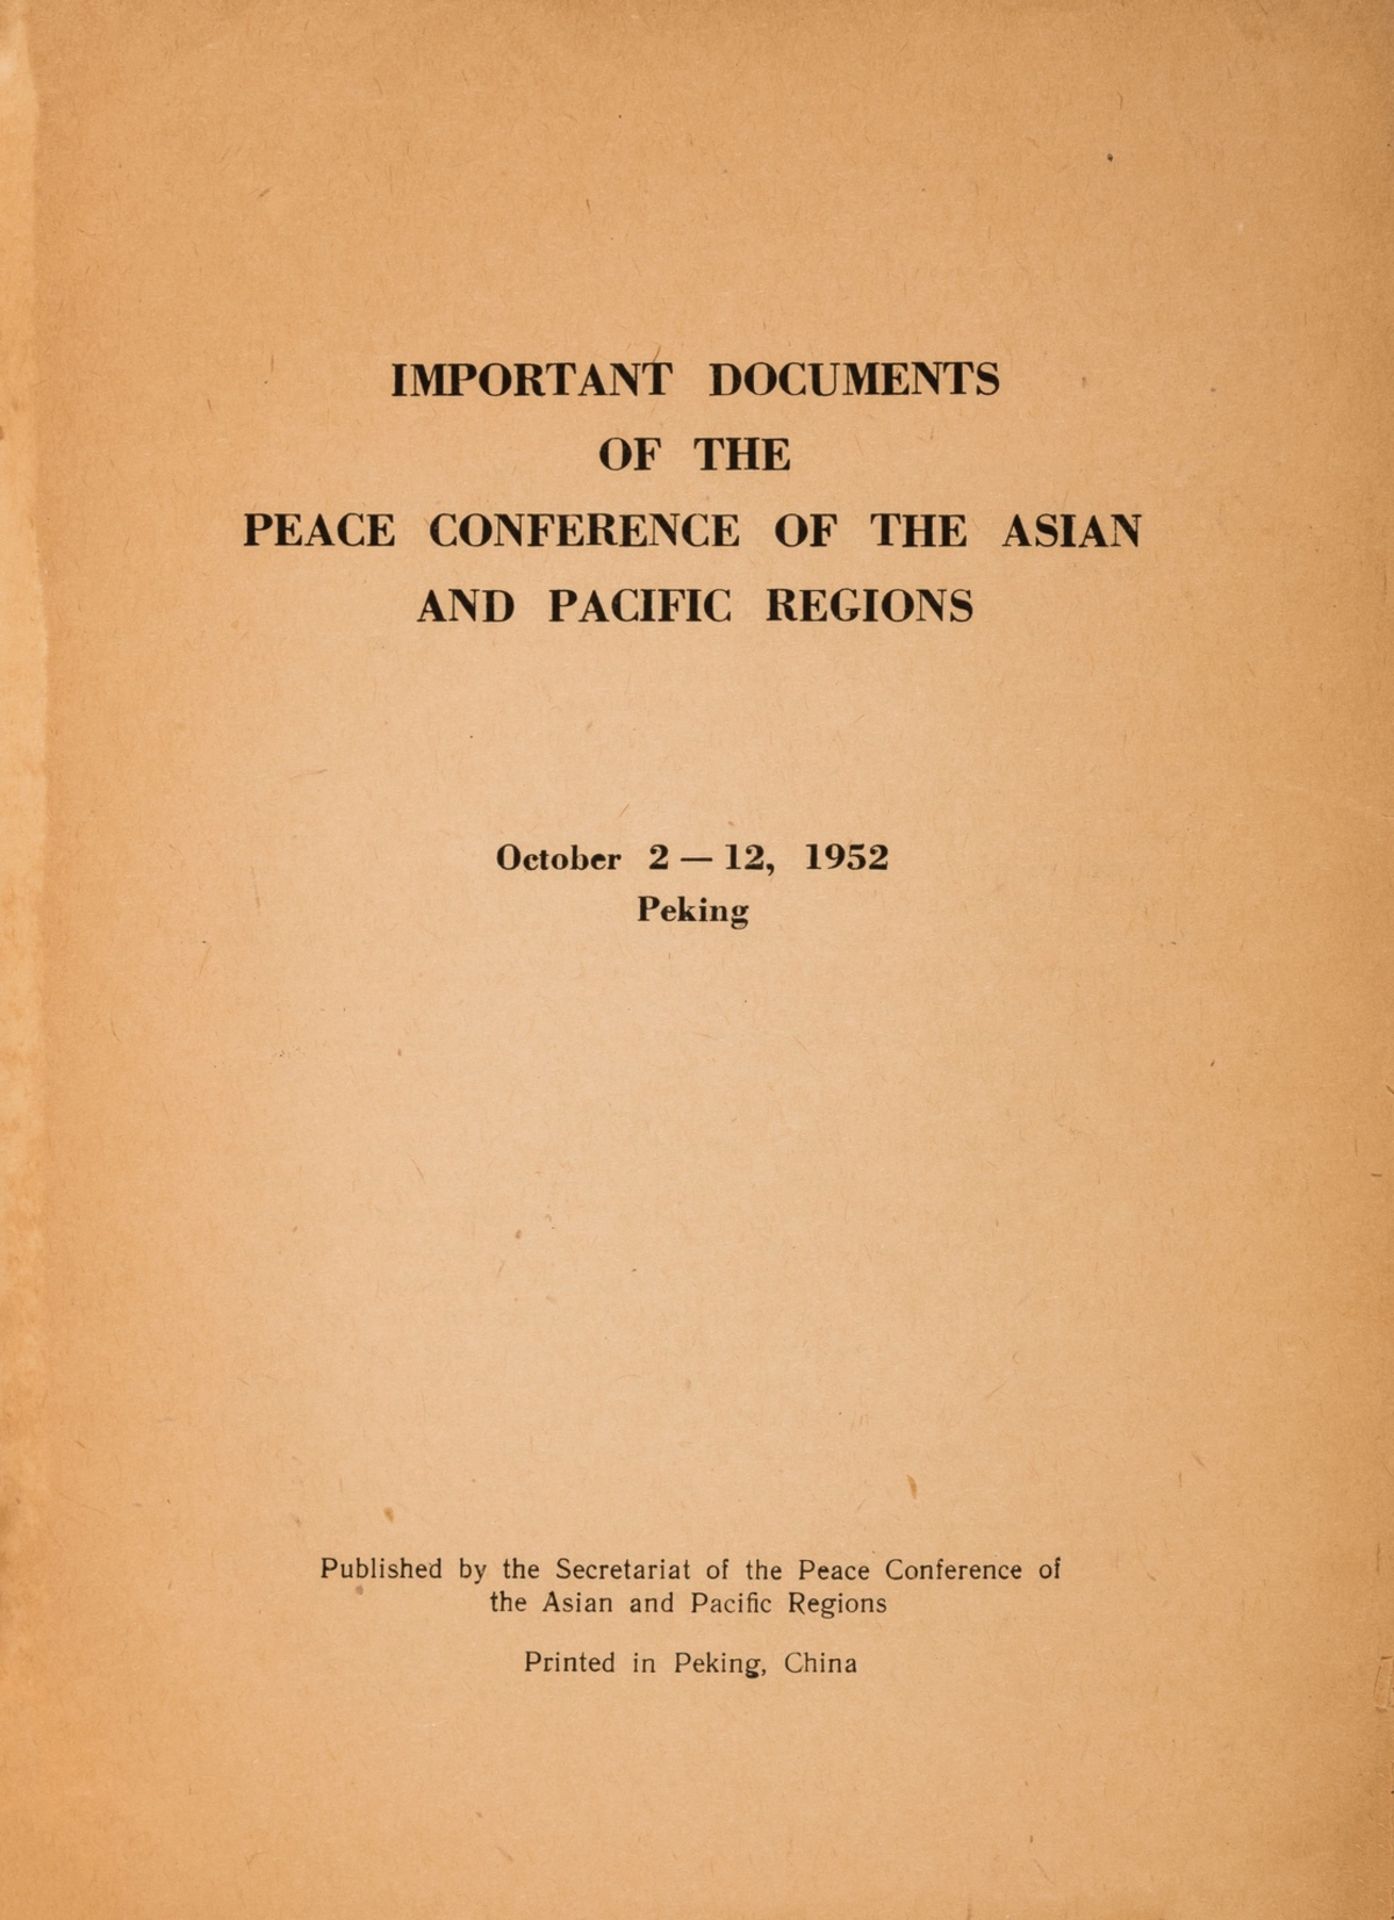 Asia.- Important Documents of the Peace Conference of the Asian and Pacific Regions, October 2-12, …